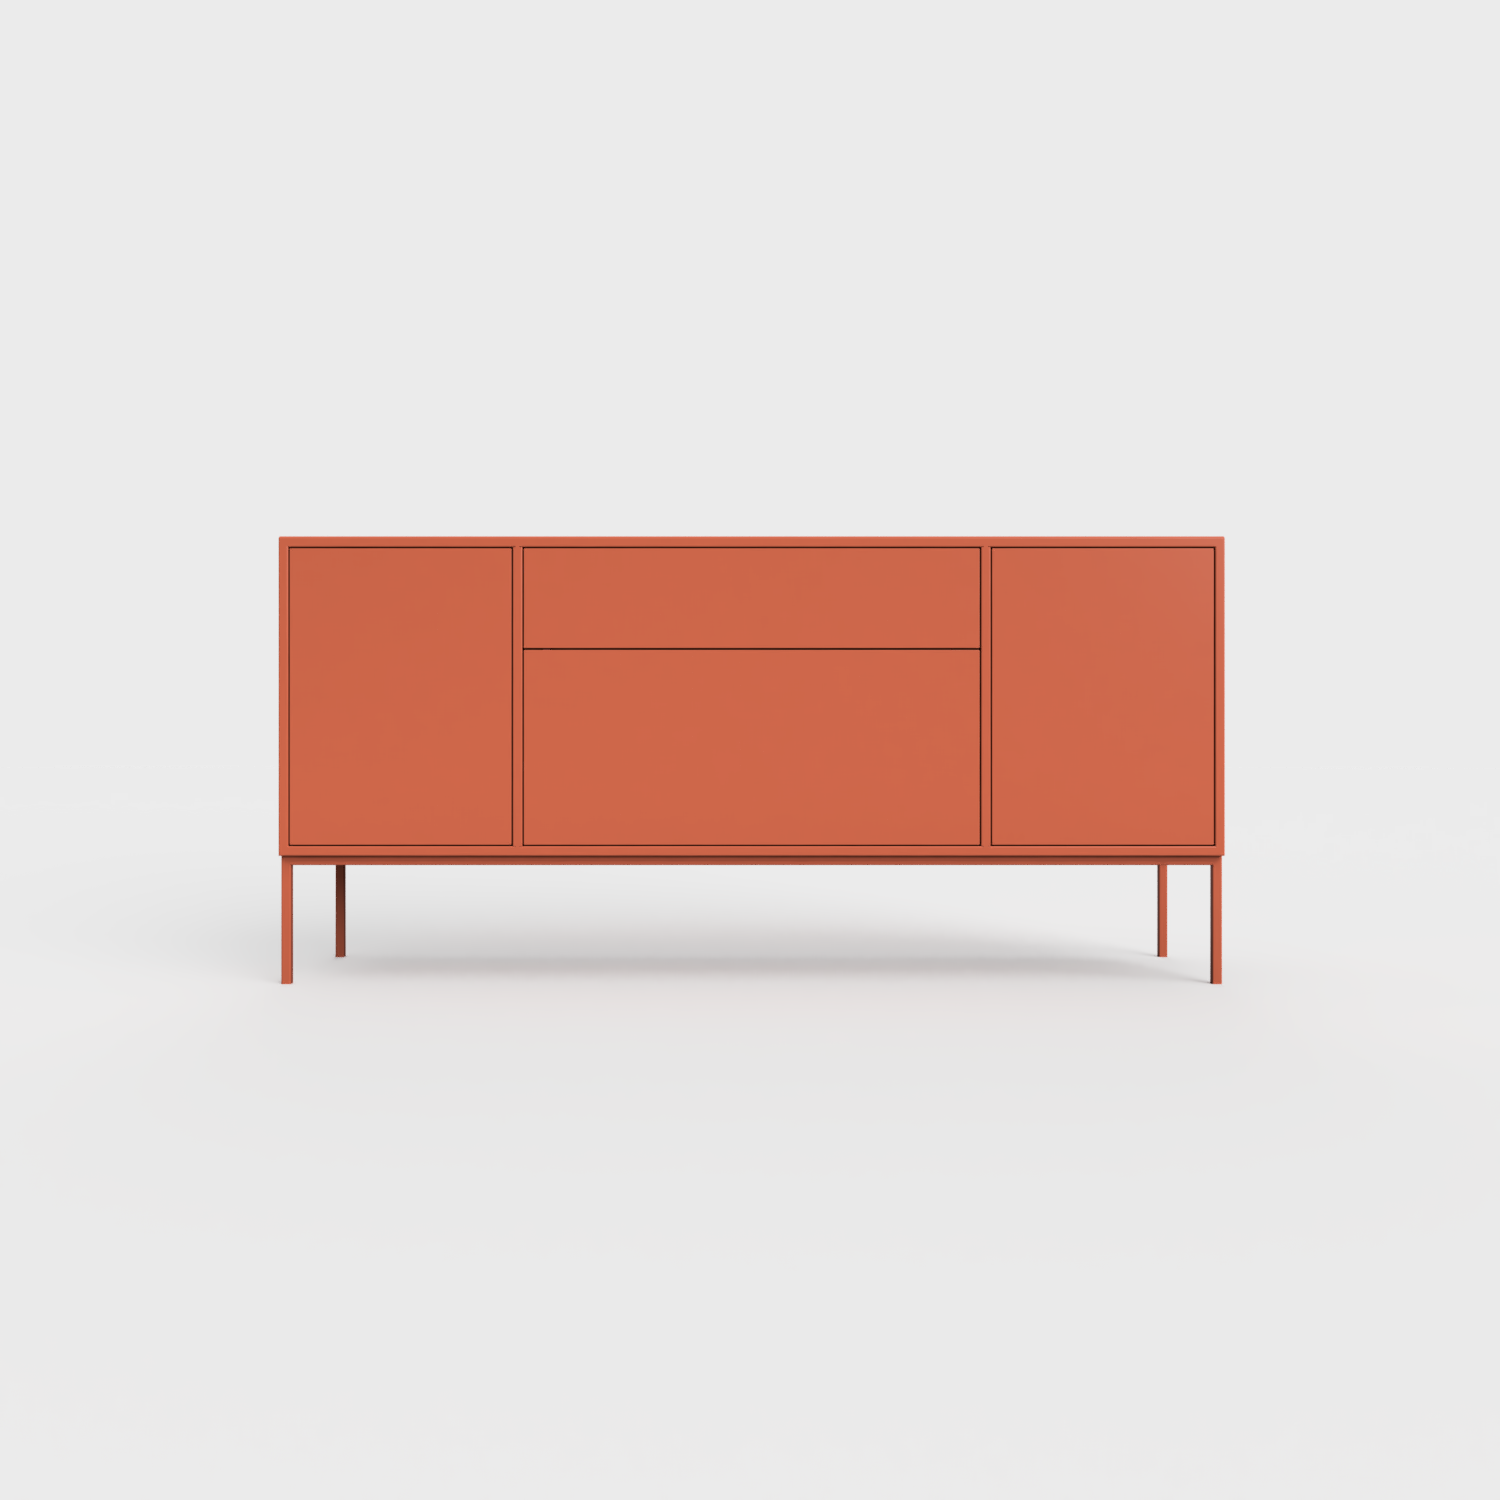 Arnika 02 Sideboard in Brick color, powder-coated steel, elegant and modern piece of furniture for your living room